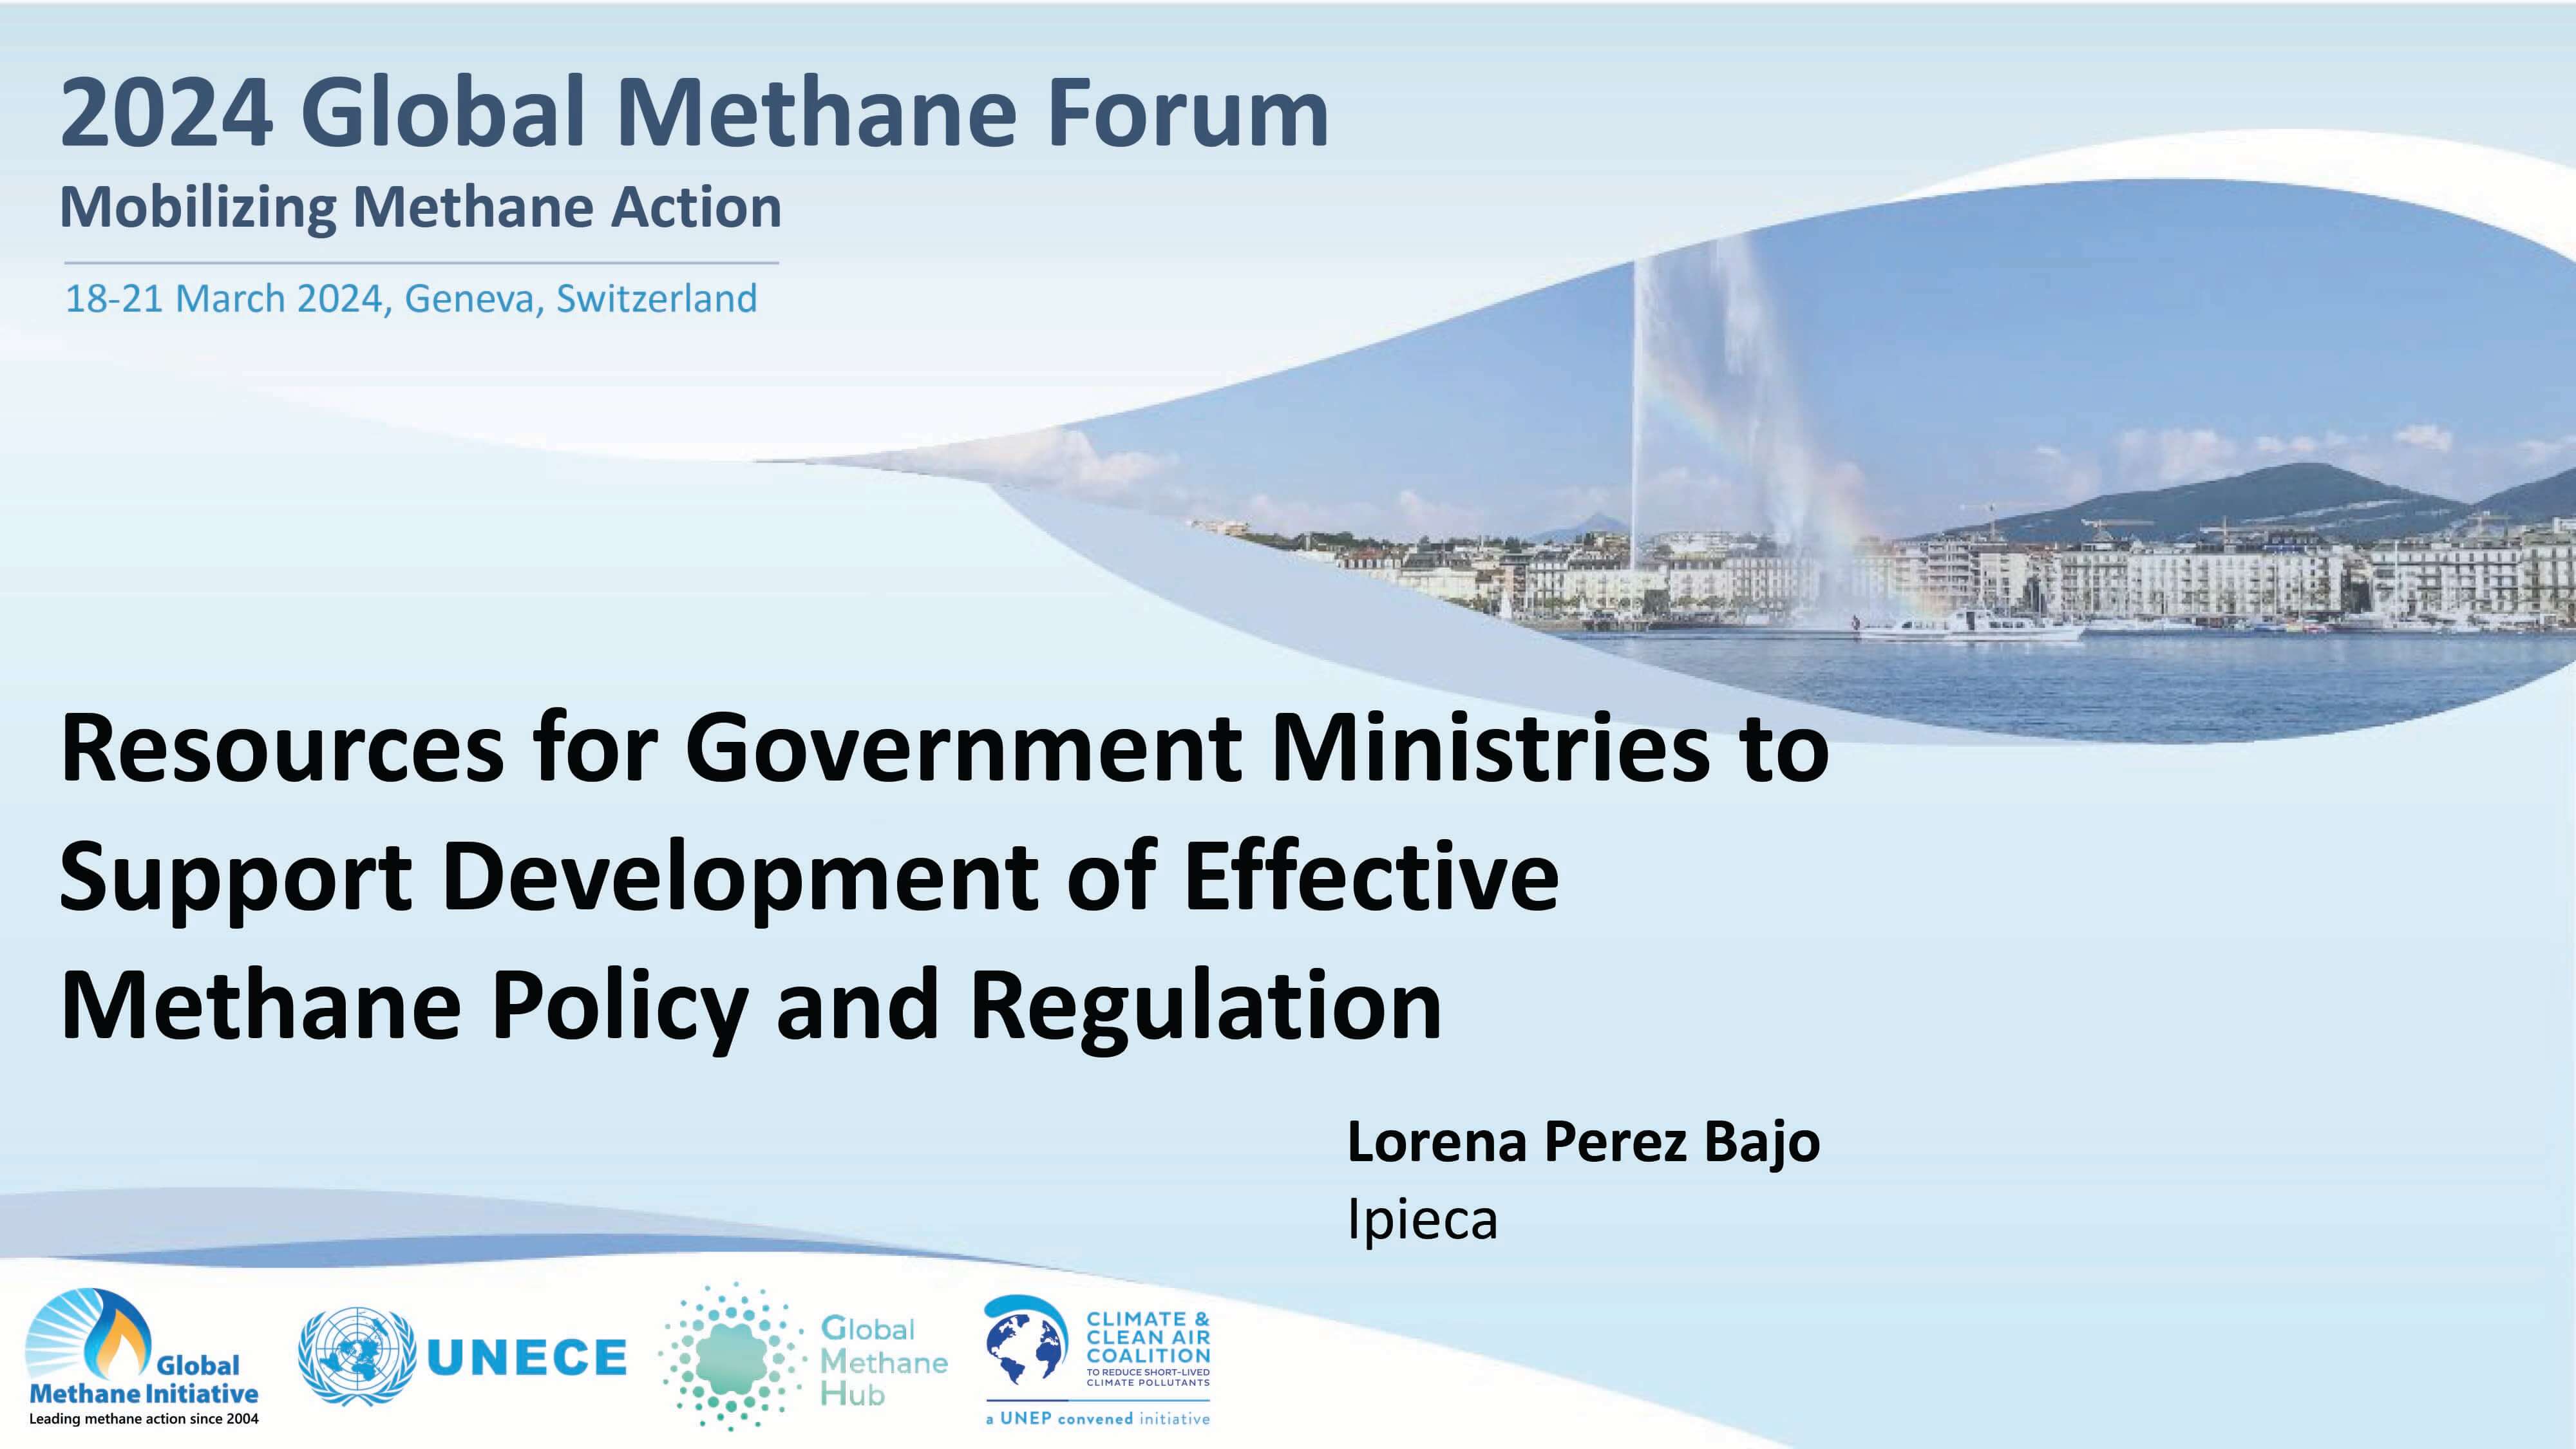 Resources for Government Ministries to Support Development of Effective Methane Policy and Regulation